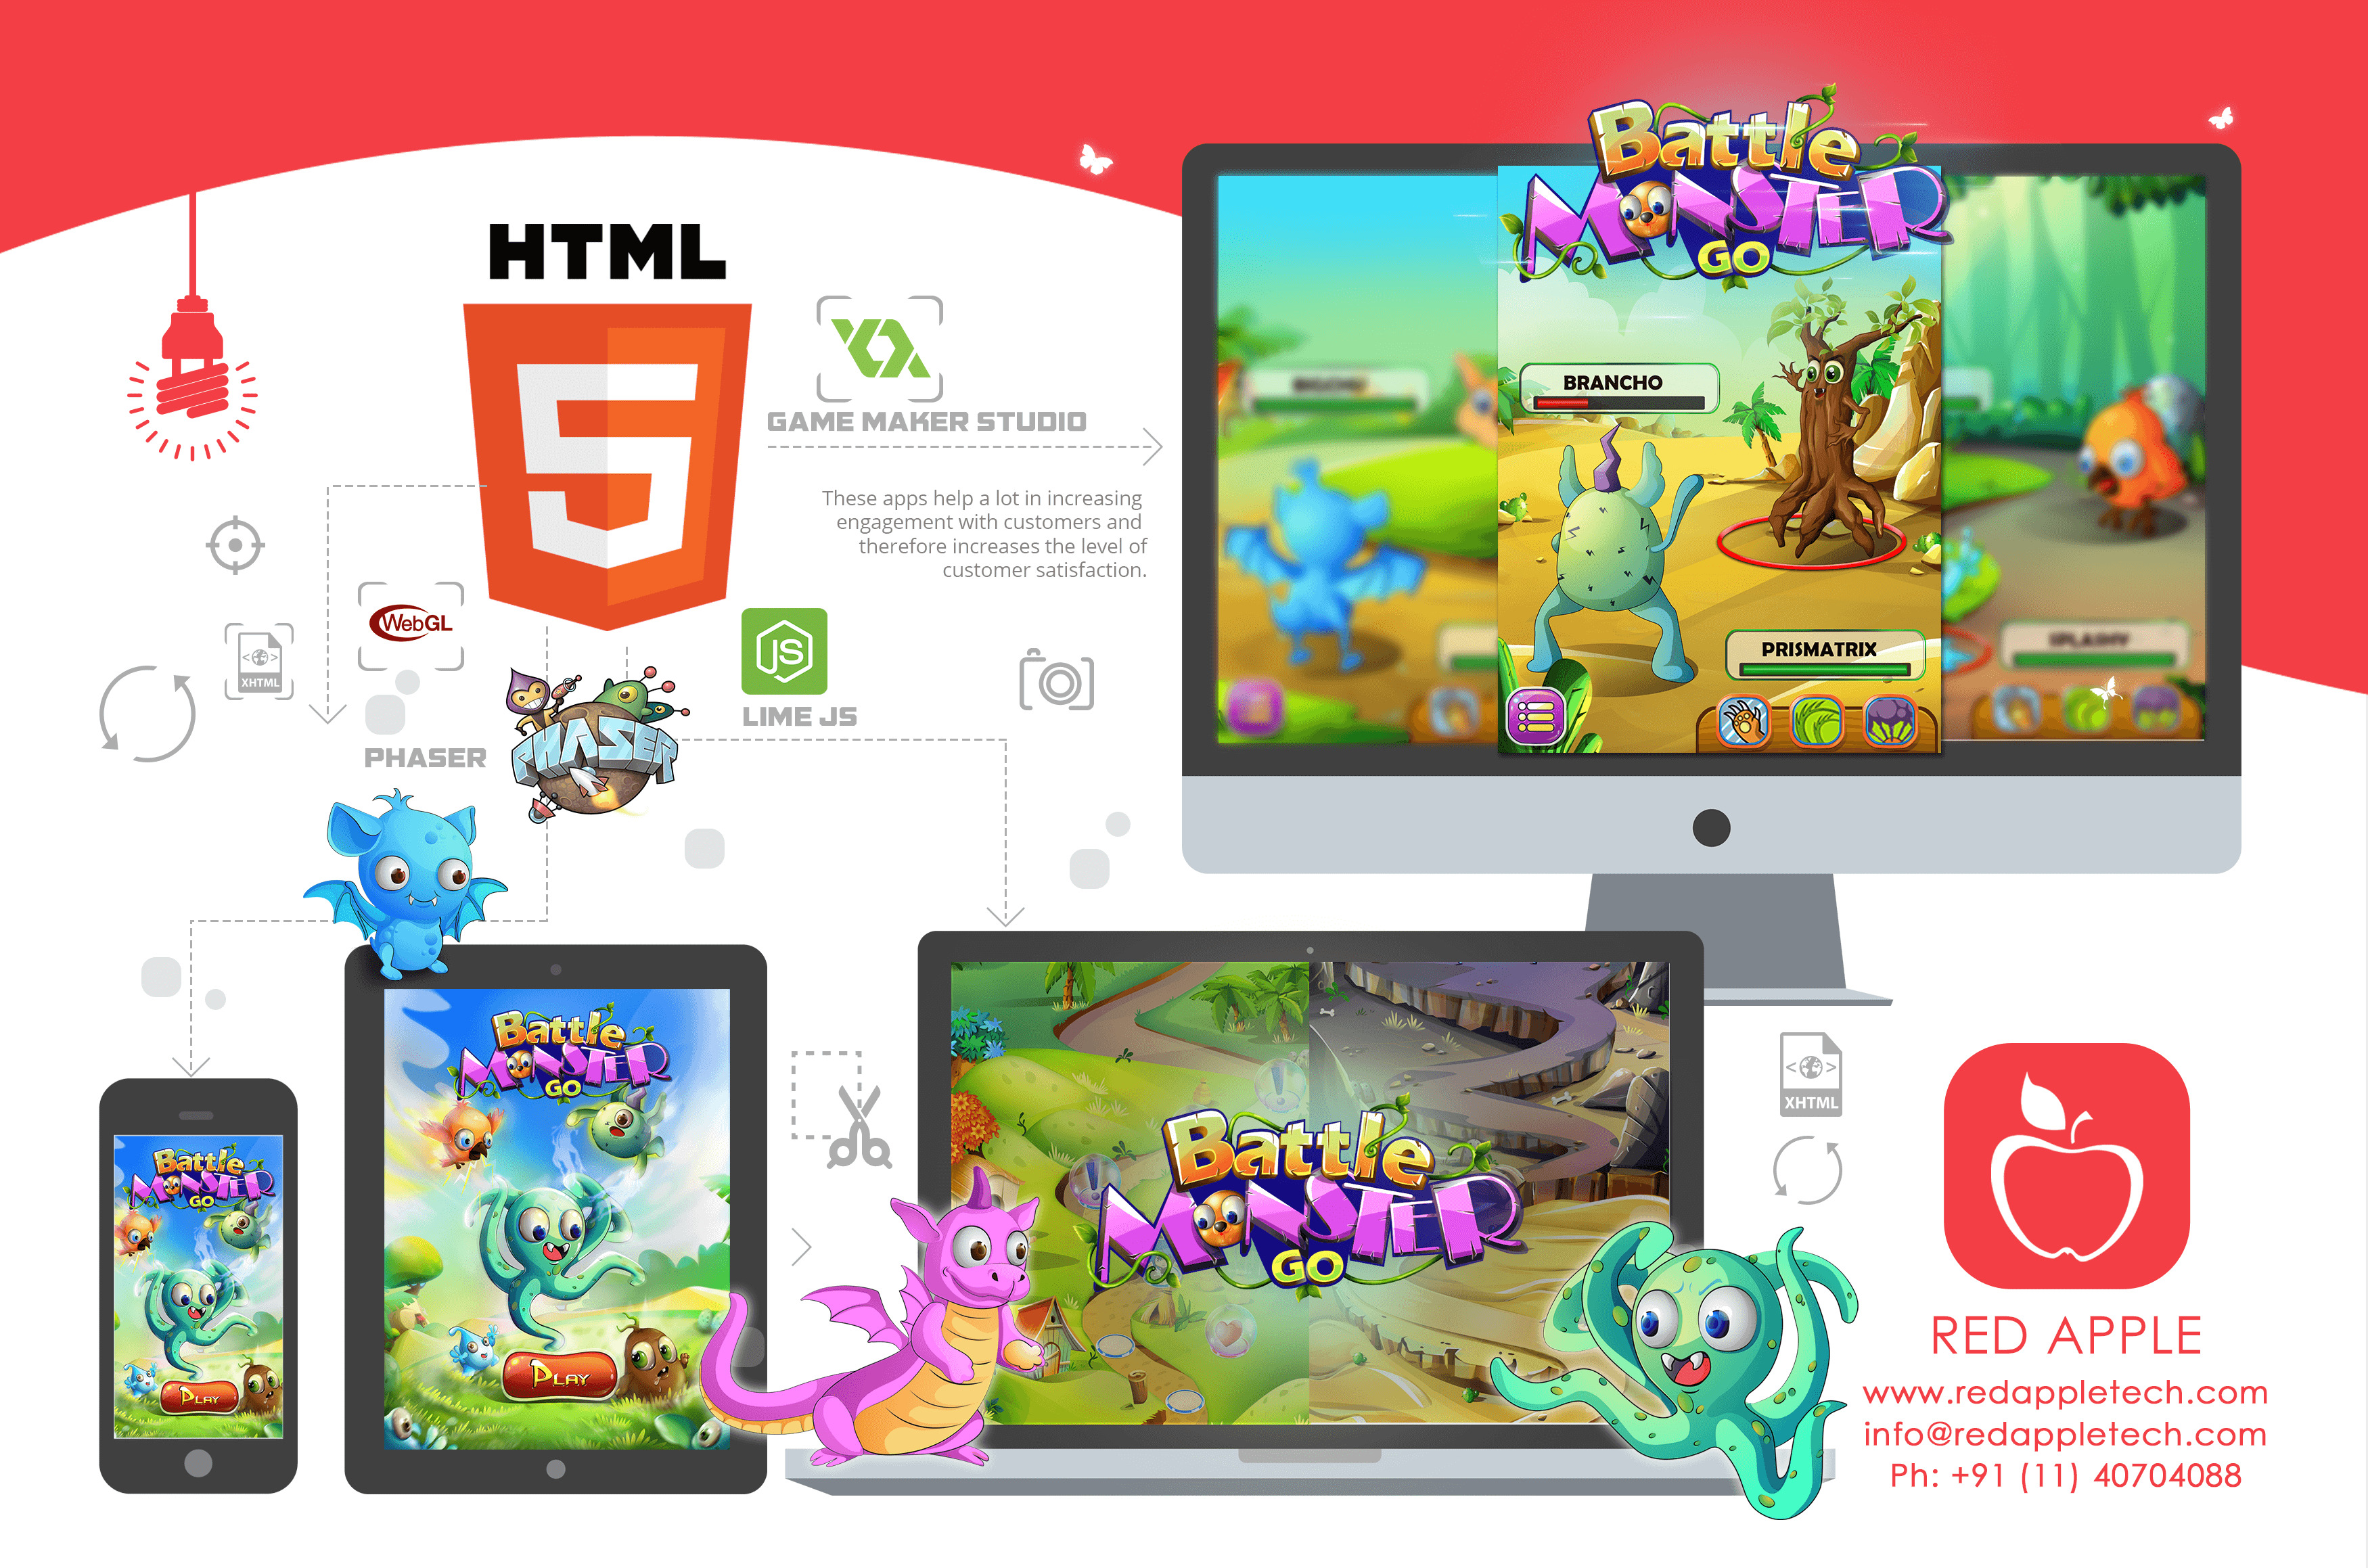 HTML5 Games – Play Free Browser Games!